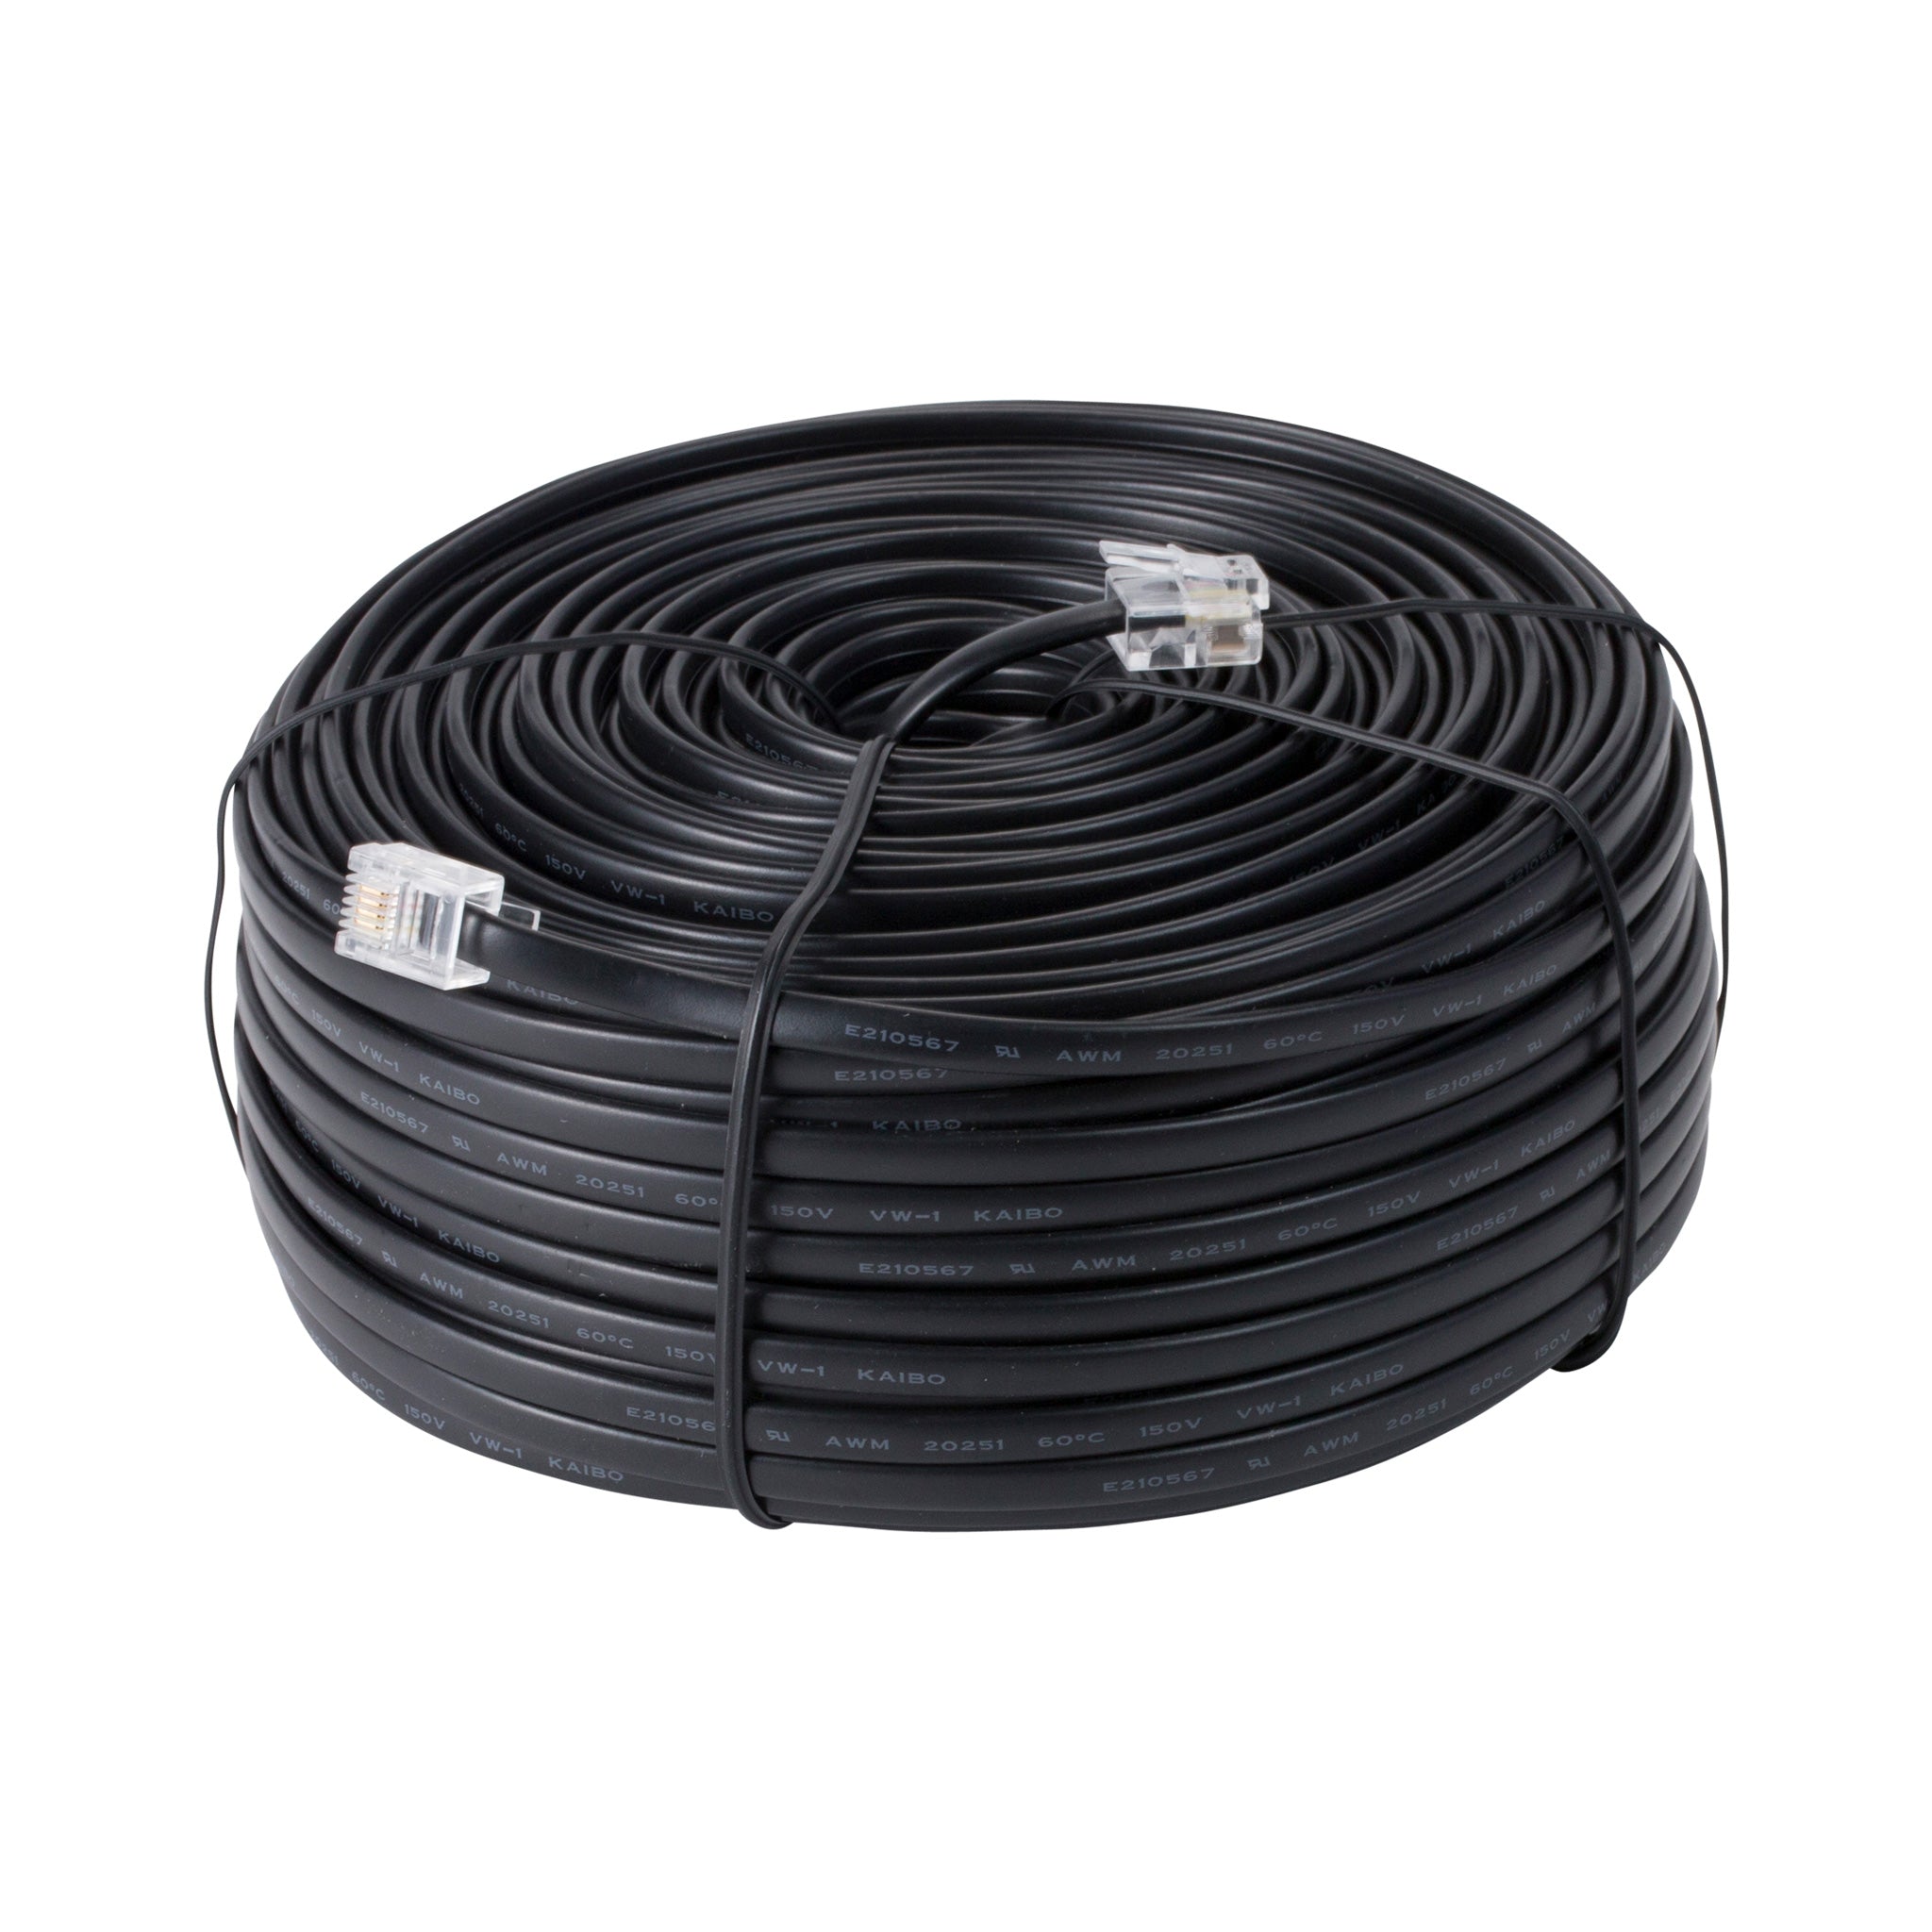 Standard 4-Conductor Cable, 200 ft (61 m) - SKU 7876-200